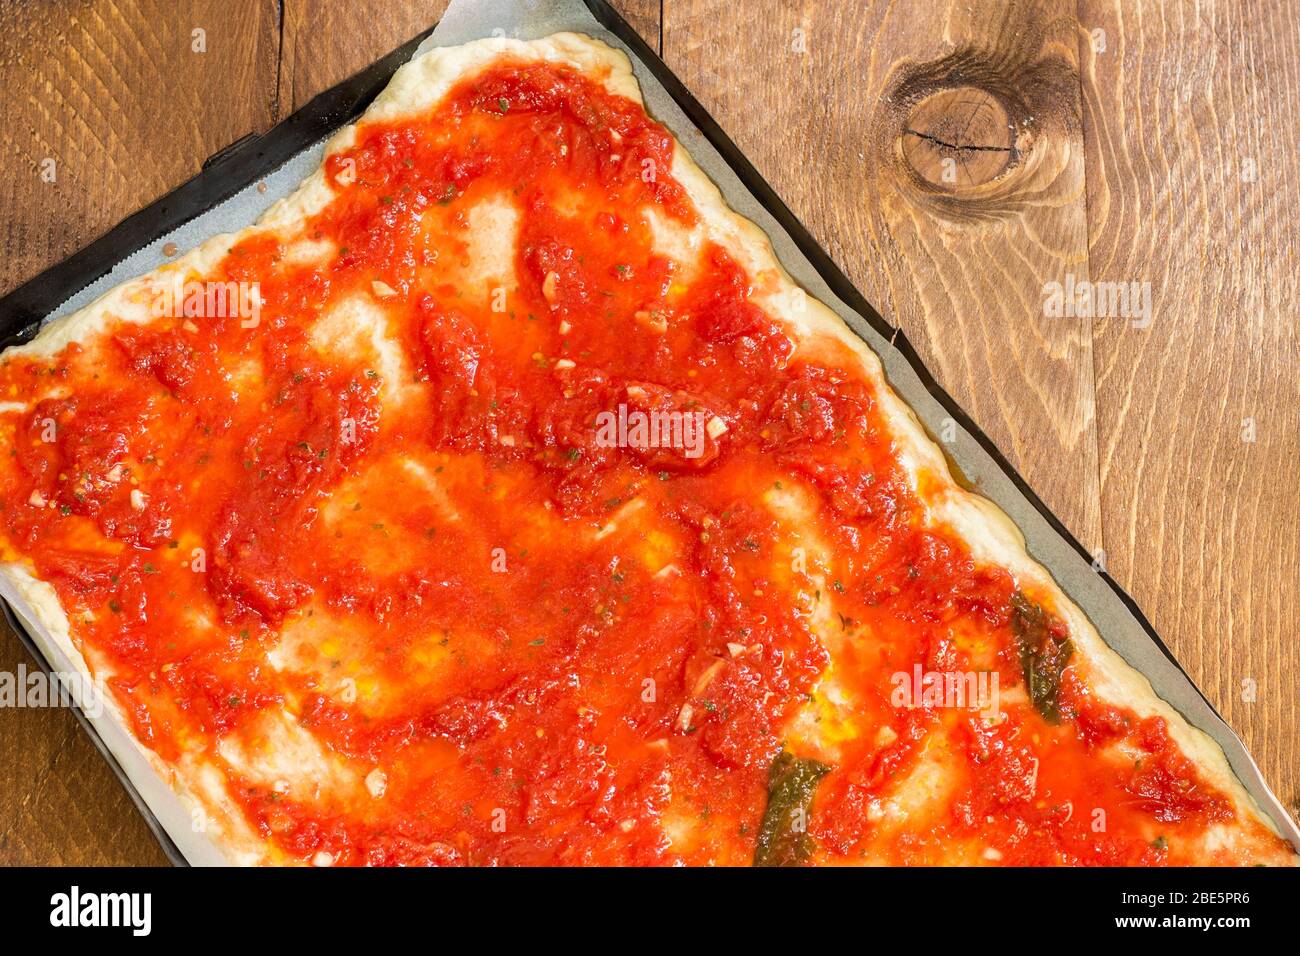 Vegan tomato pizza pan without cheese ready to bake in the home wood oven Stock Photo